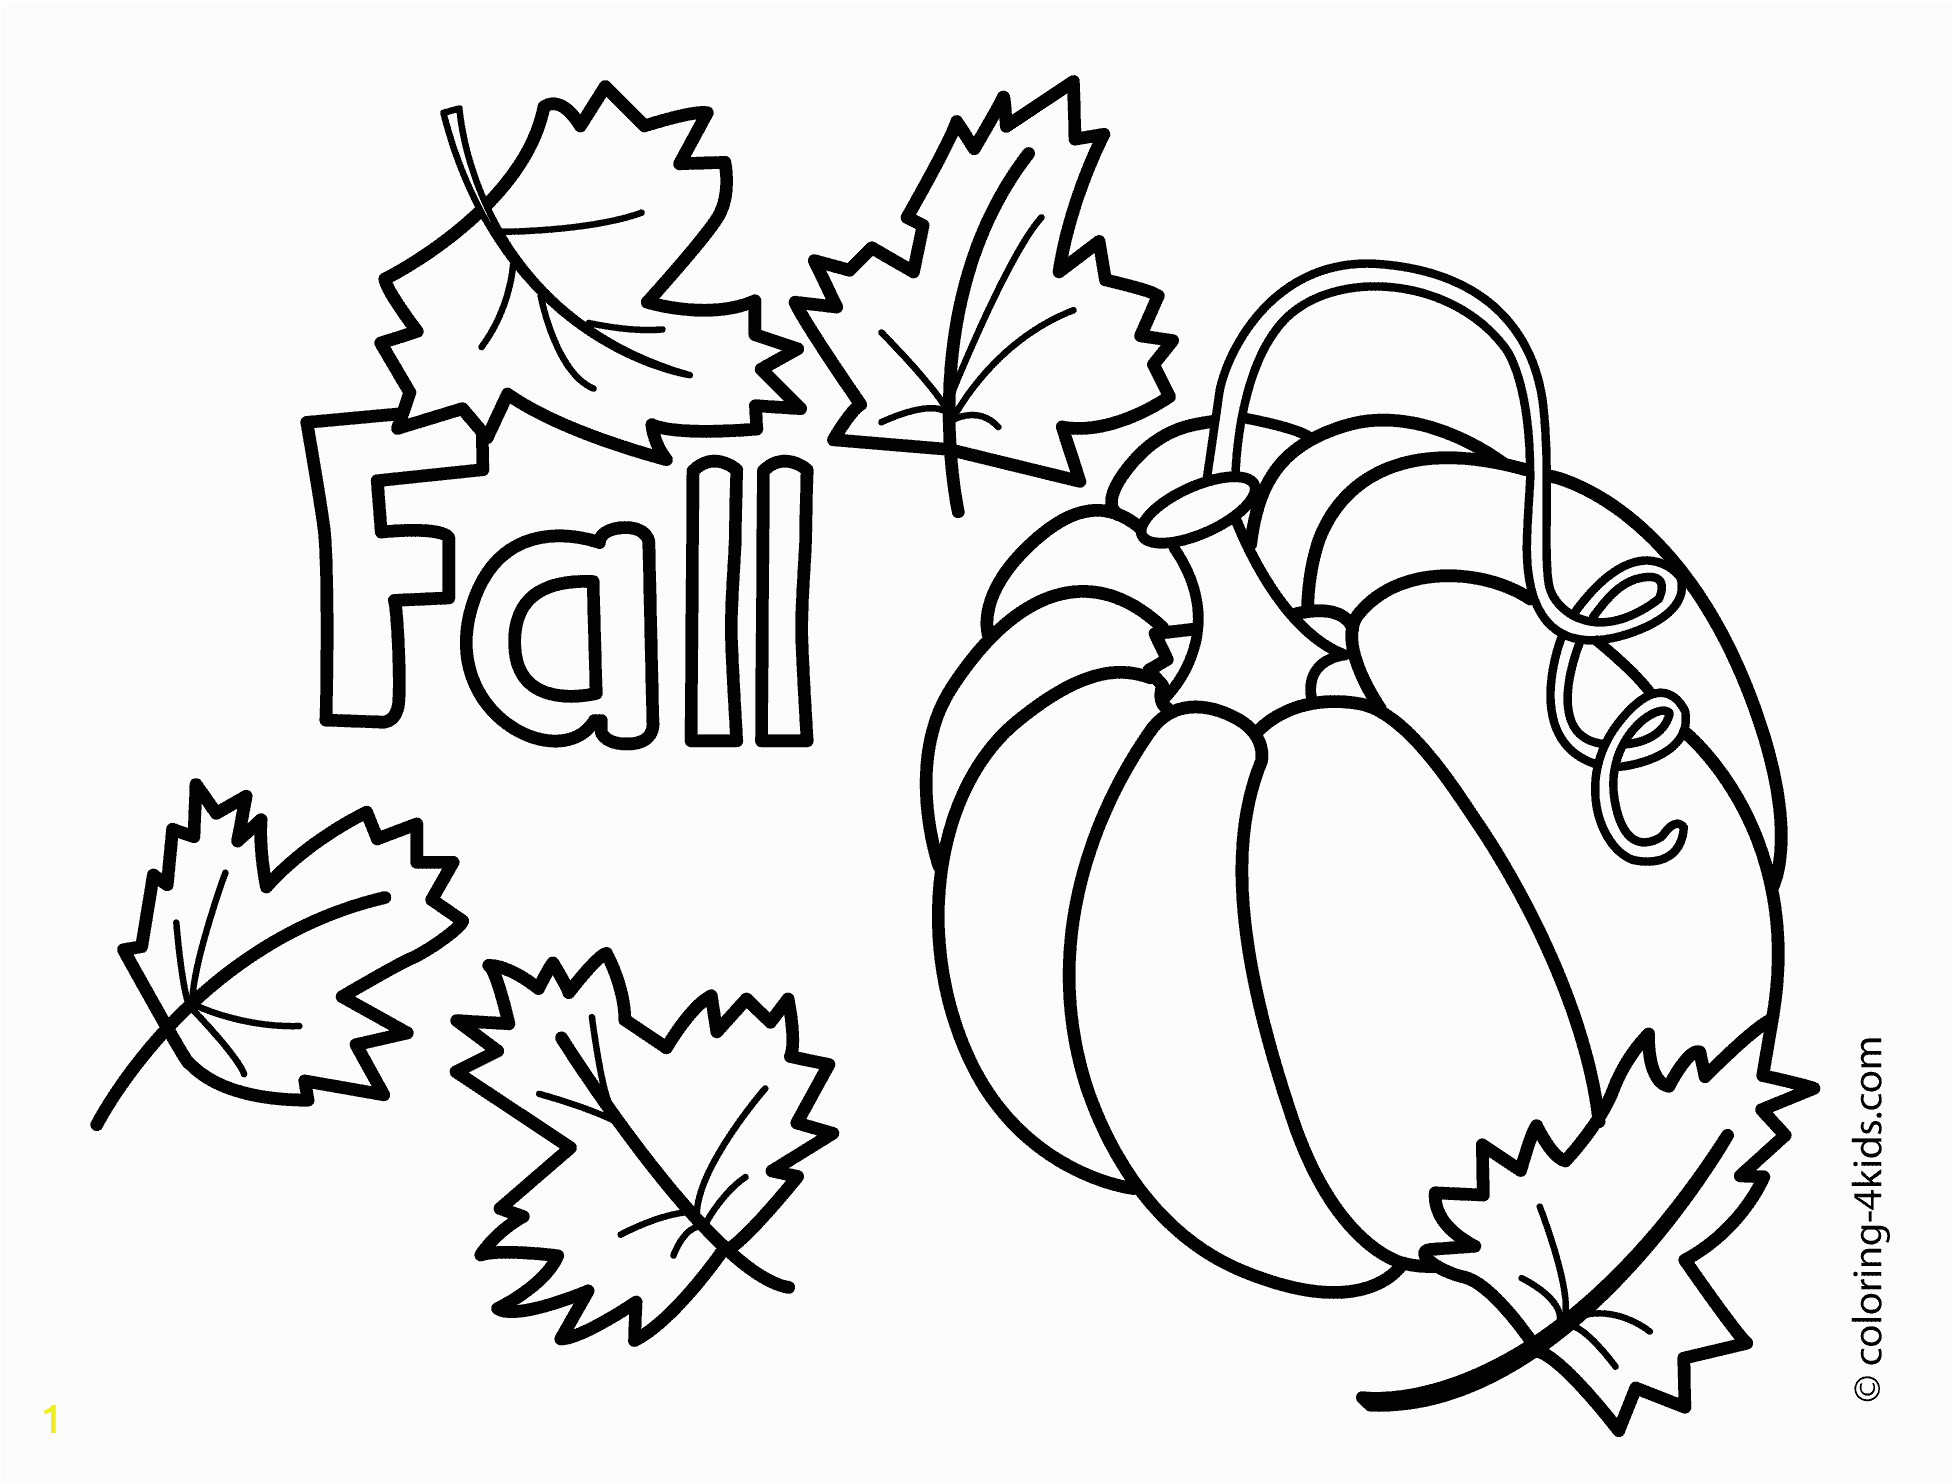 Pumpkin Leaf Coloring Page Coloring Pages 42 Fall Coloring Sheets Inspirations